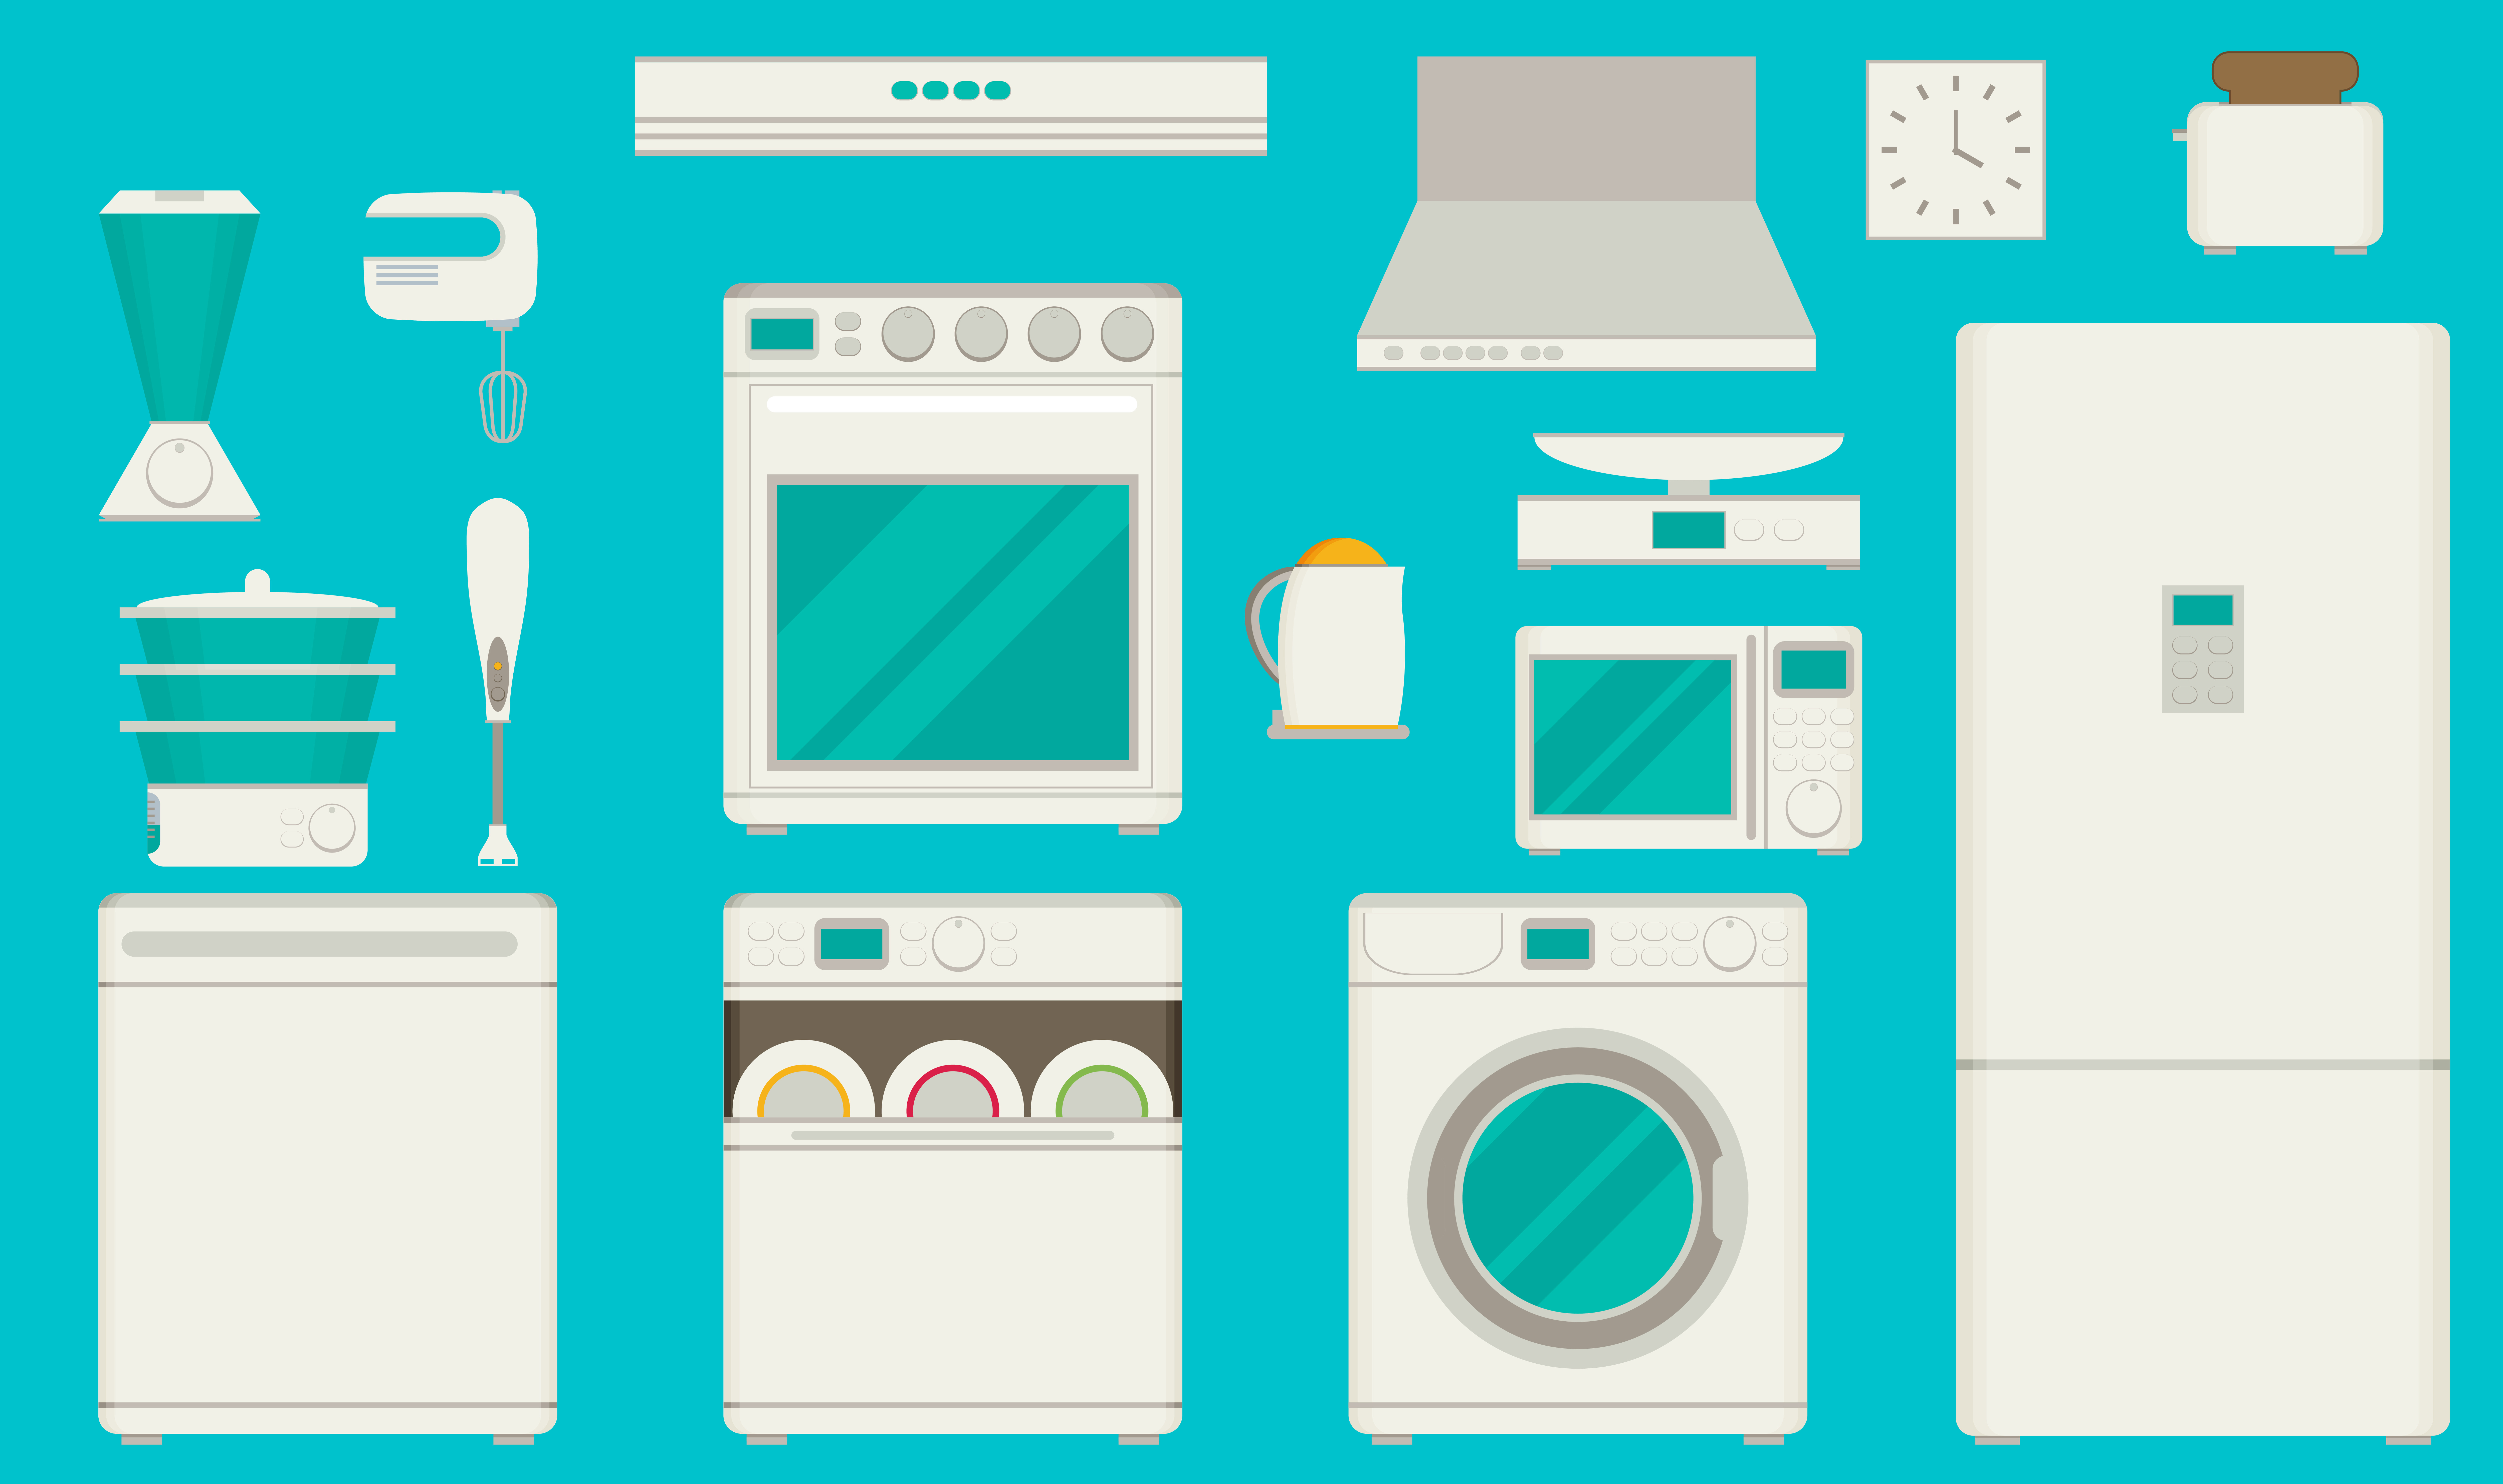 Various household appliances including a dishwasher, washer, over, microwave, fridge, and many others are represented with icons against a light blue background.